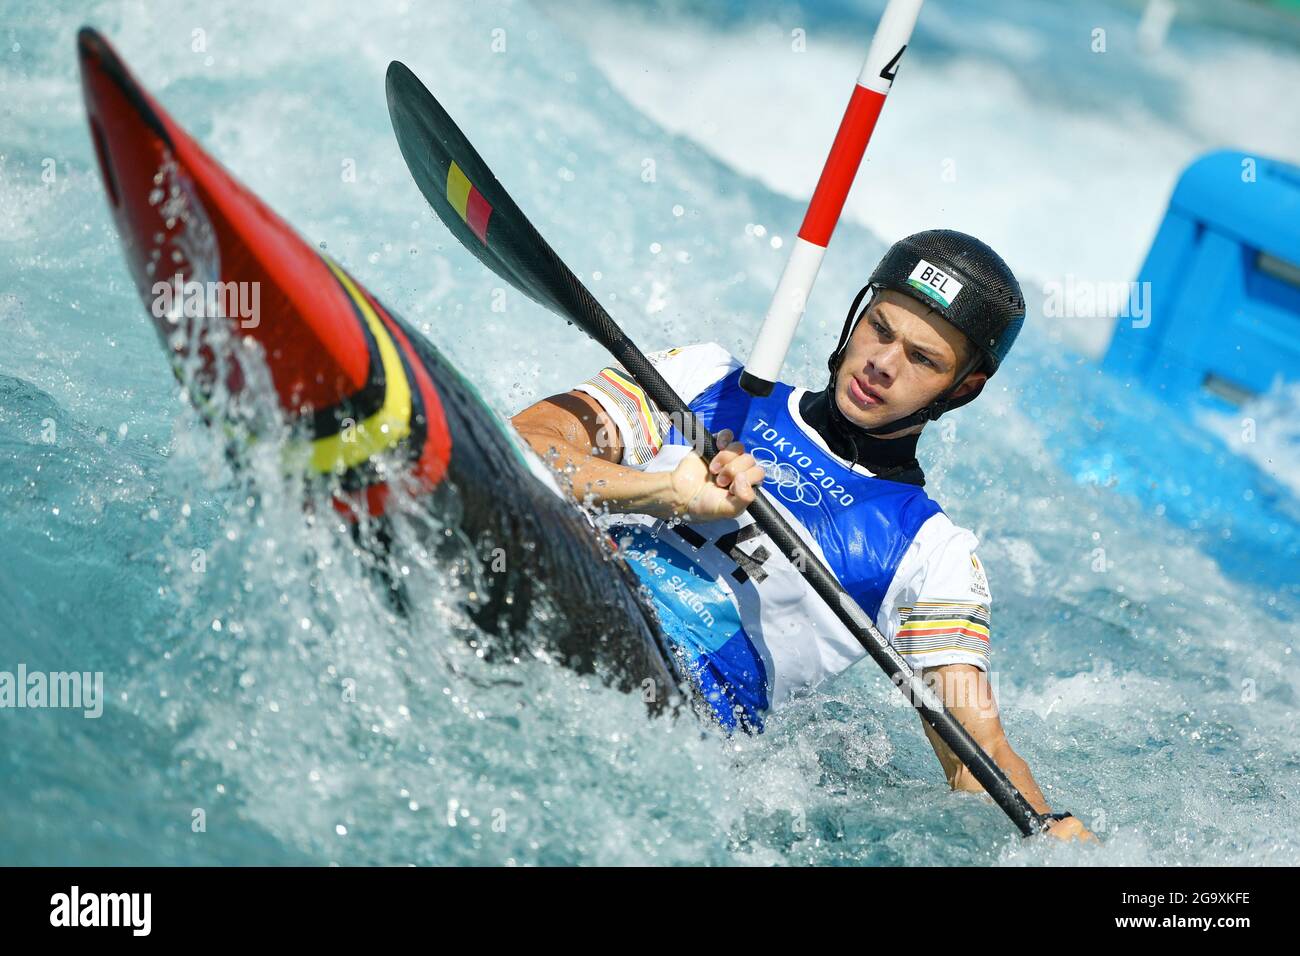 the Kasai Canoe Slalom Centre. 28th July, 2021. de COSTER Gabriel (BEL),  JULY 28, 2021 - Canoe Slalom : Men's Kayak Heats 1st Run during the Tokyo  2020 Olympic Games at the